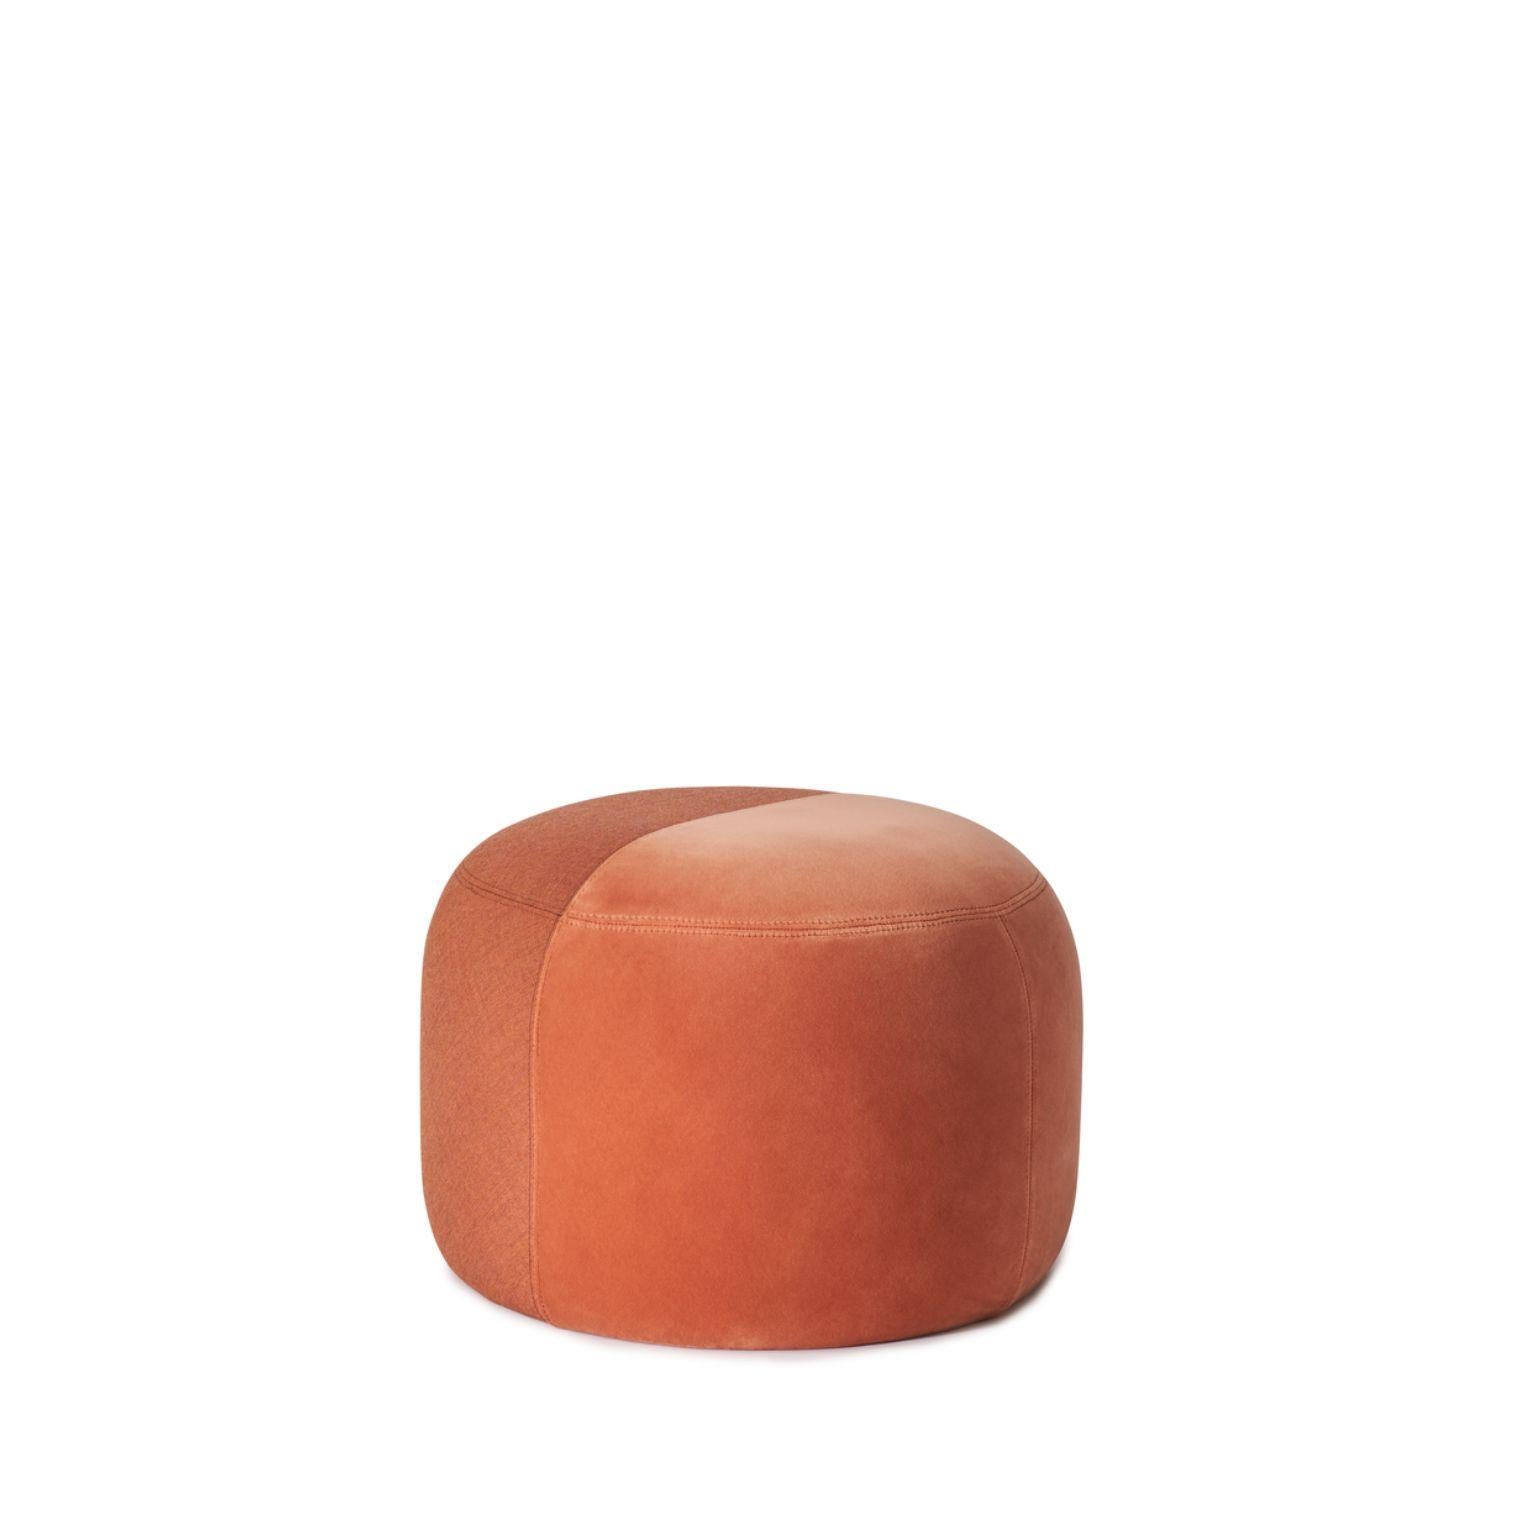 Dainty Pouf Burnt Orange Rusty Rose by Warm Nordic
Dimensions: D55 x H 39 cm
Material: Textile upholstery, Wooden frame, foam.
Weight: 9.5 kg
Also available in different colours and finishes. Please contact us.

Sophisticated, two-coloured